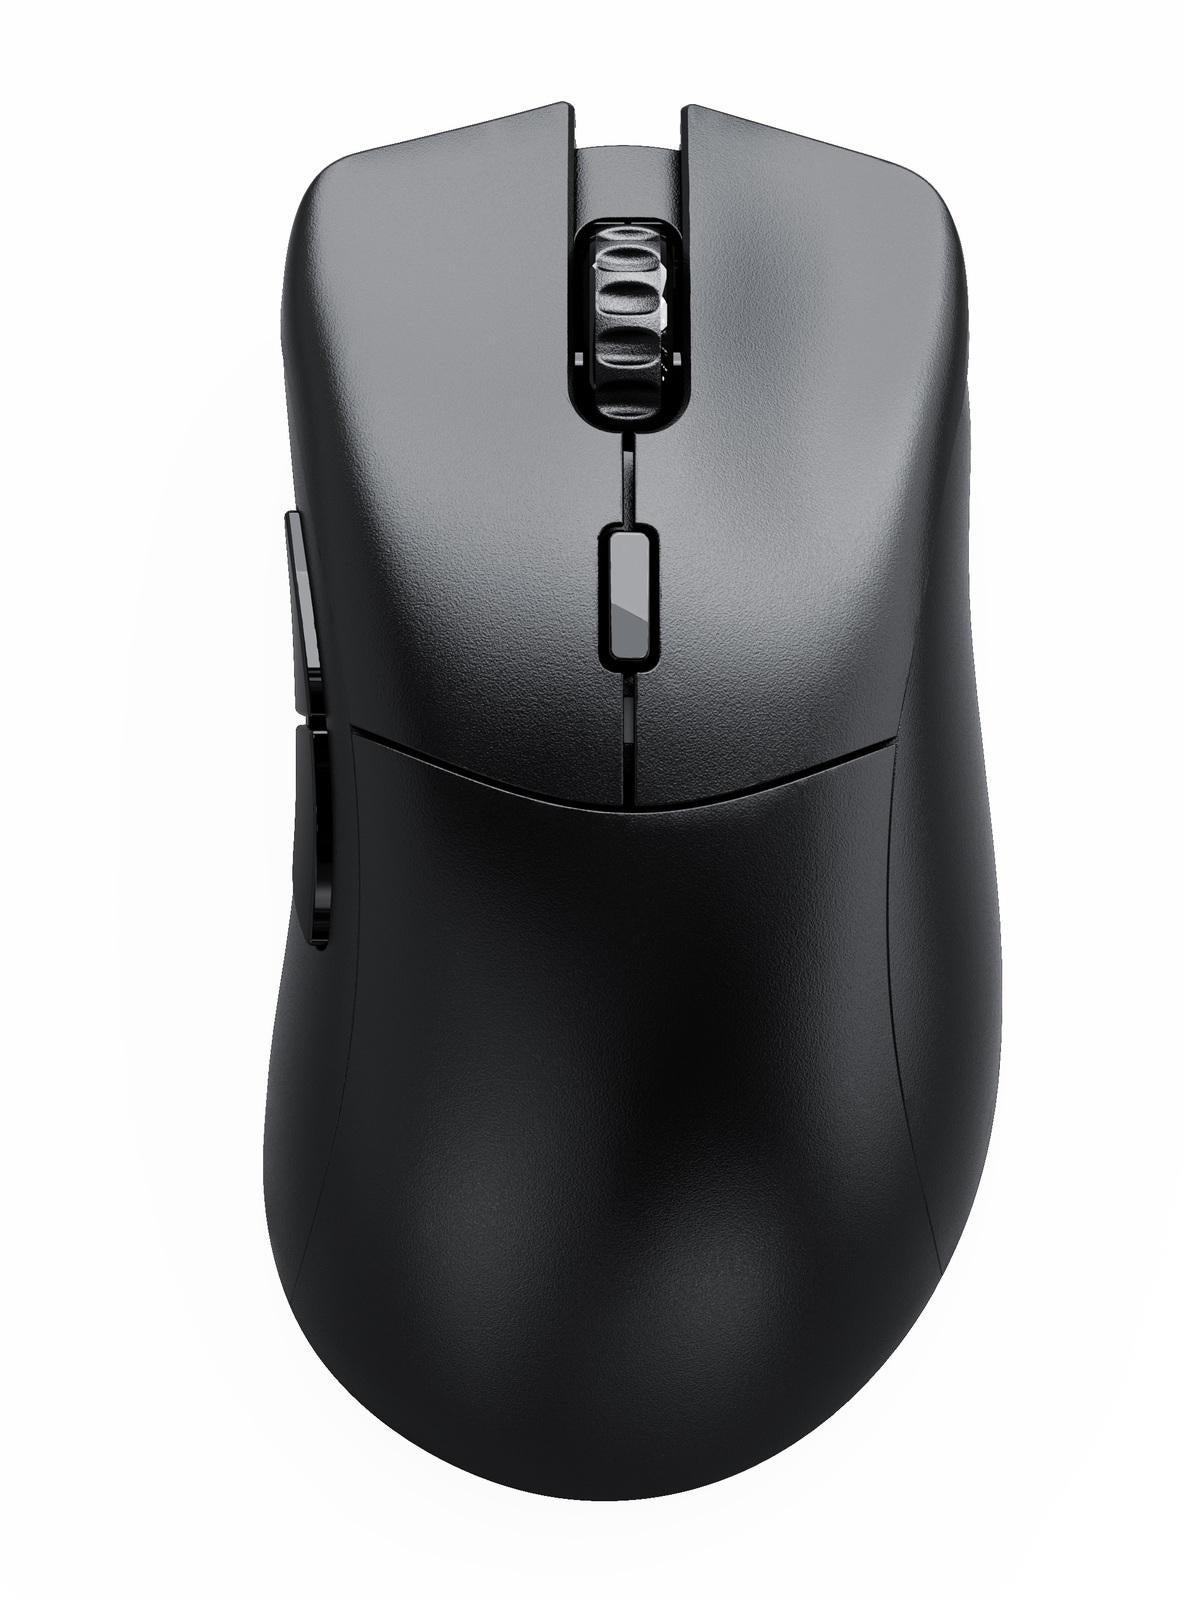 Glorious Model D 2 PRO Wireless Gaming Mouse - 1K Polling